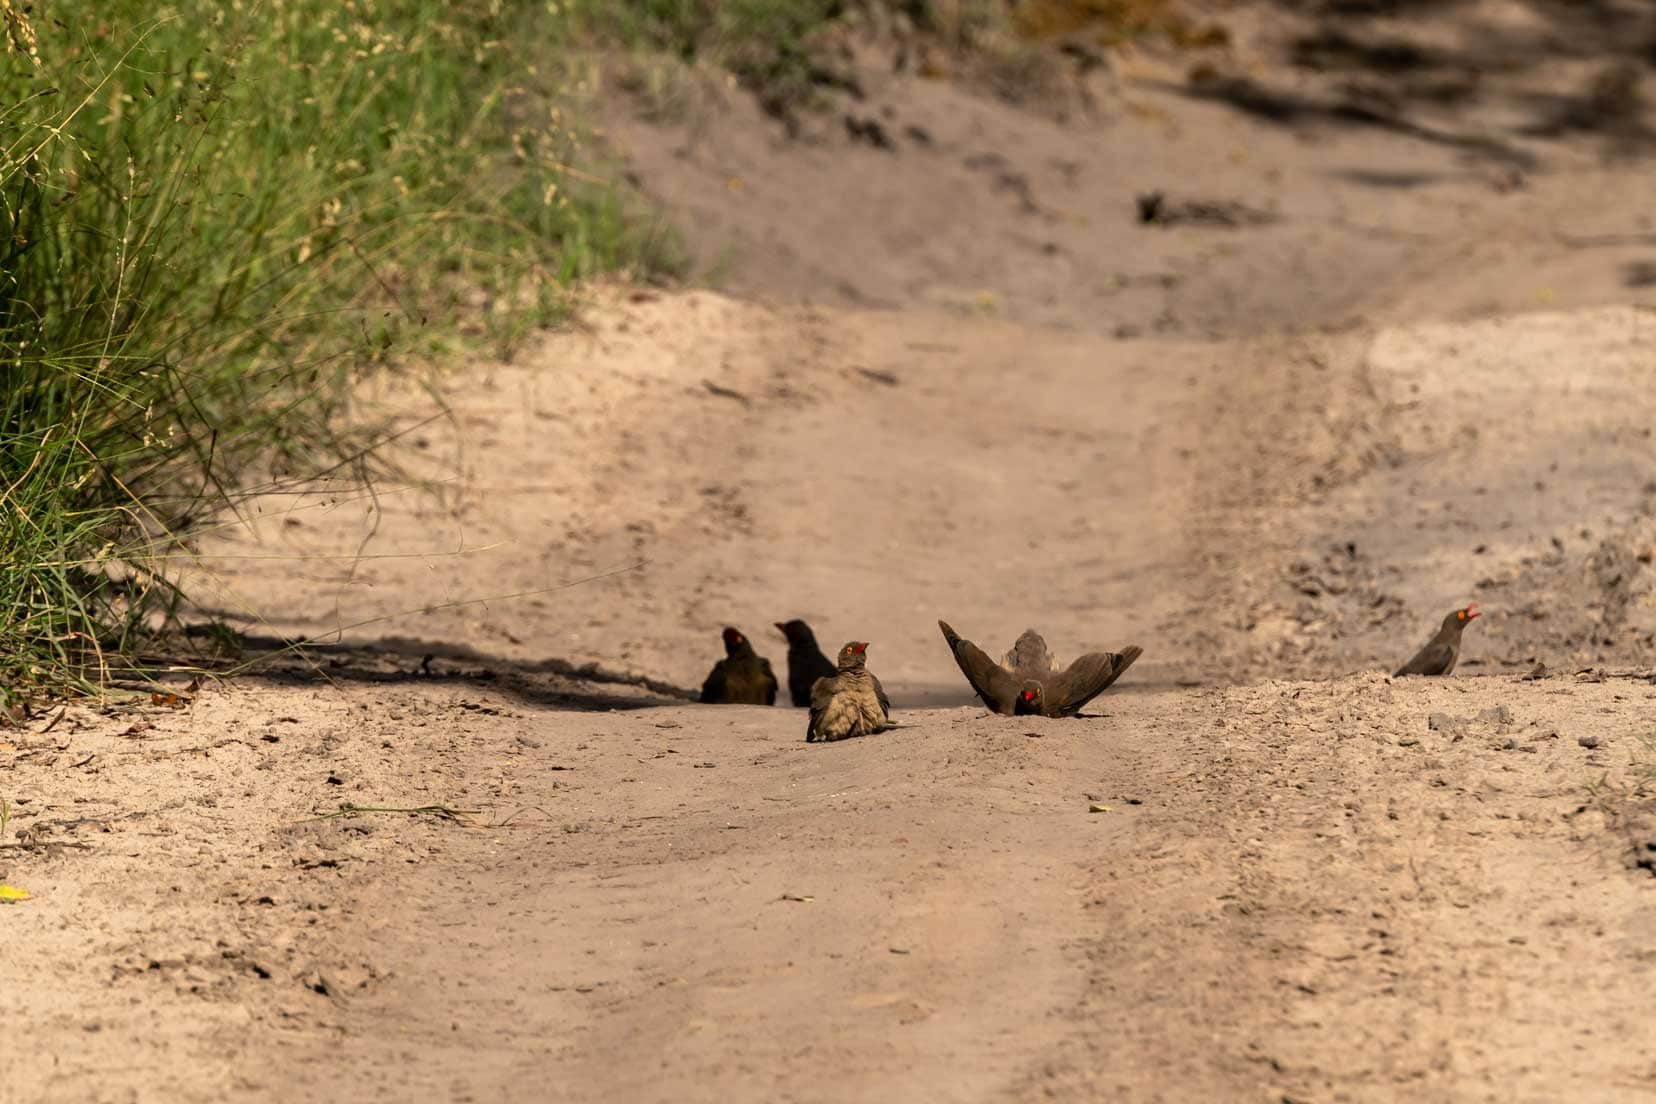 On the path – a group of oxpeckers were taking a dust bath – part if the caring routine for their feathers. They get rid of excess oils and also insulate the feathers.